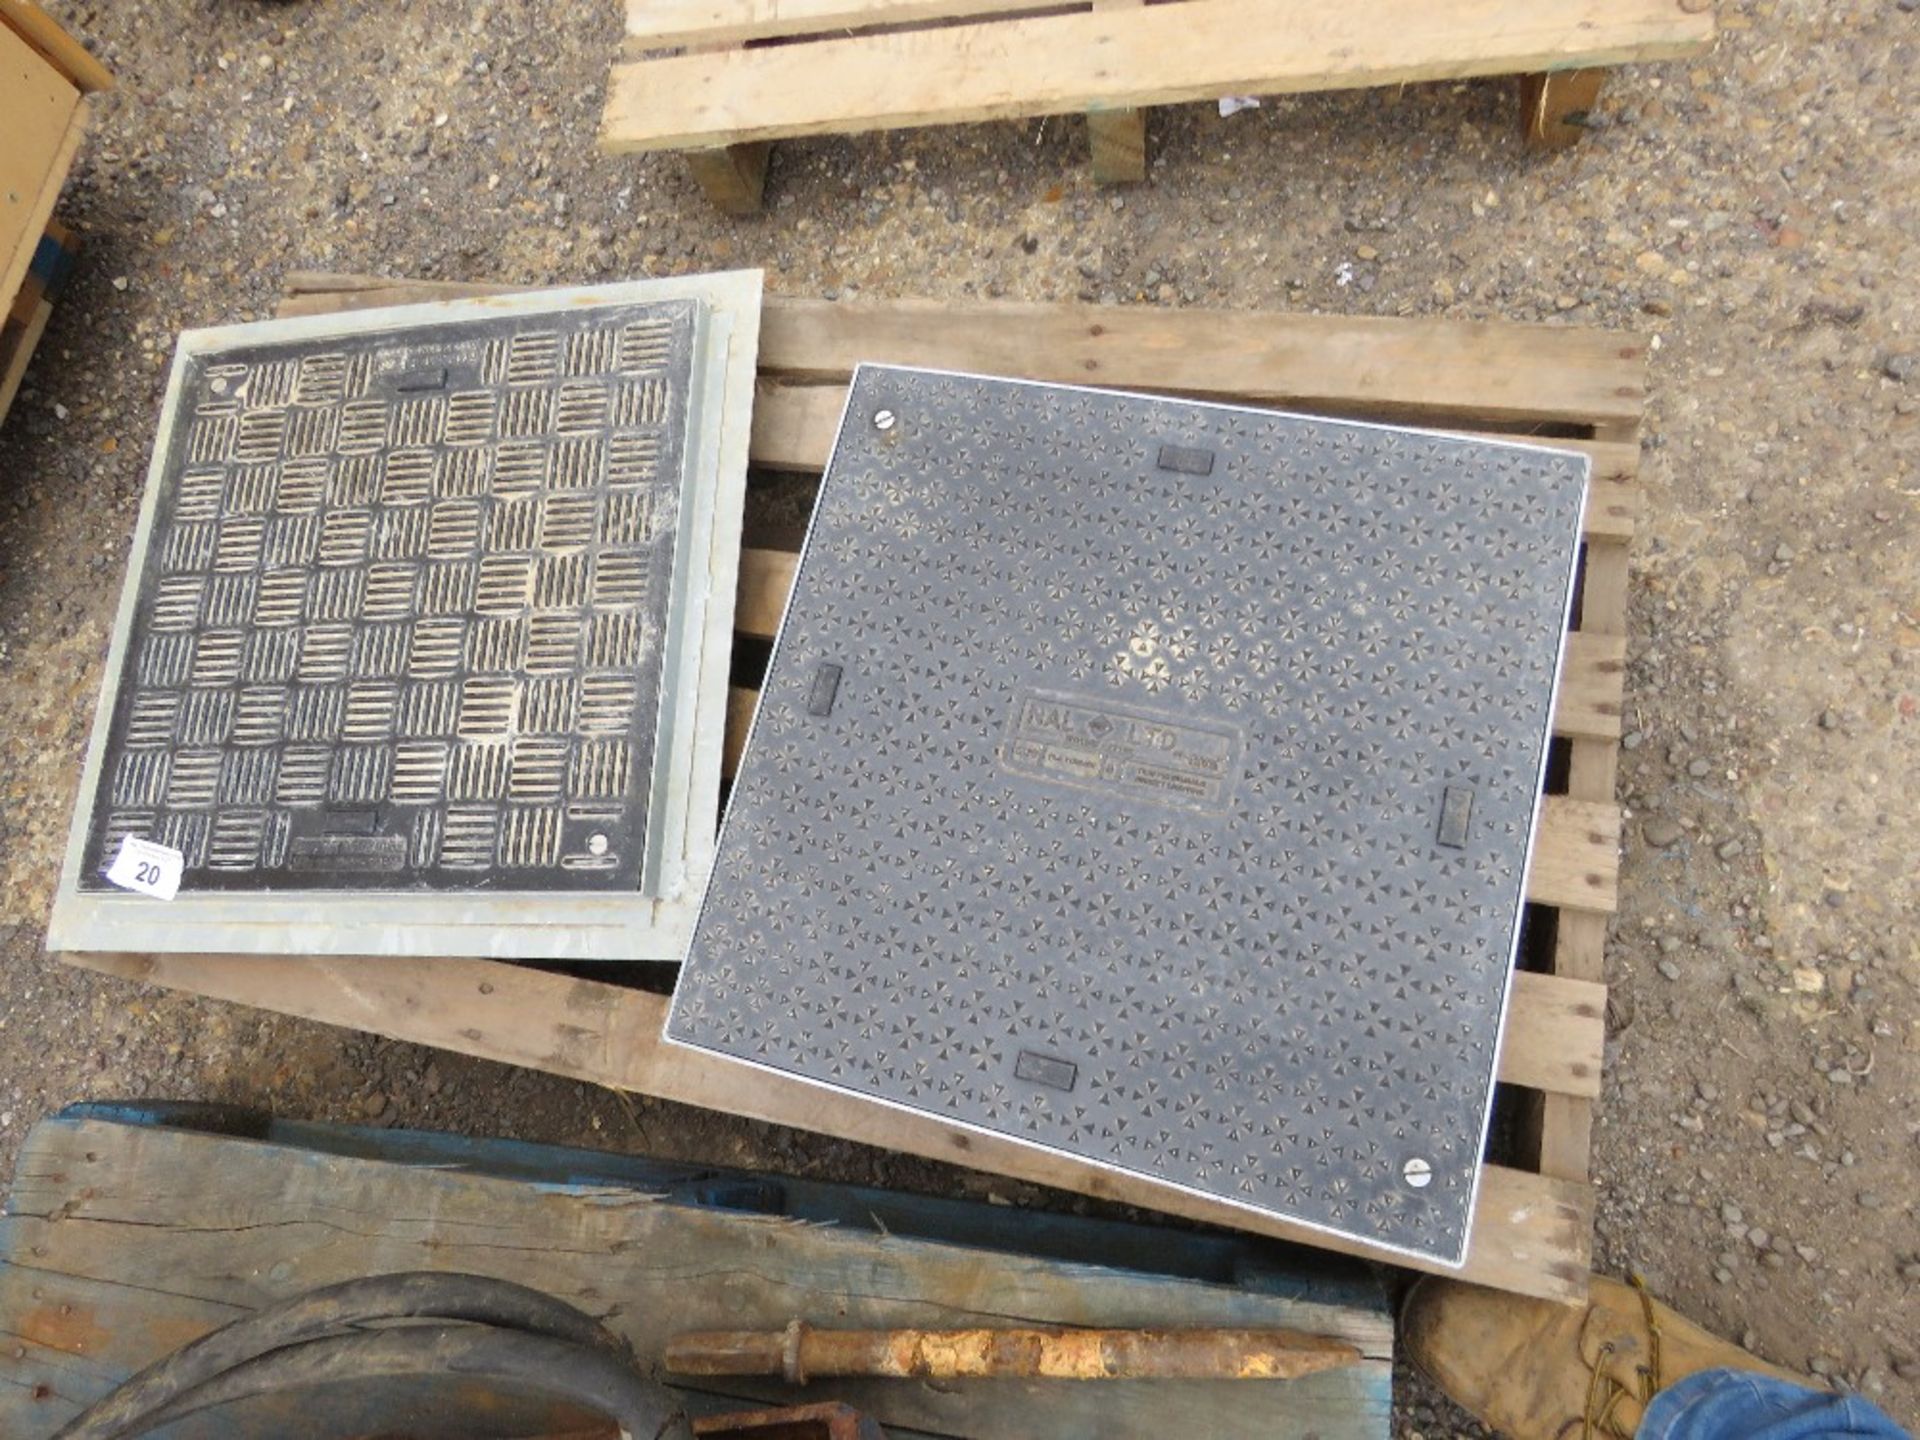 2 X DRAIN COVERS WITH SURROUNDS.